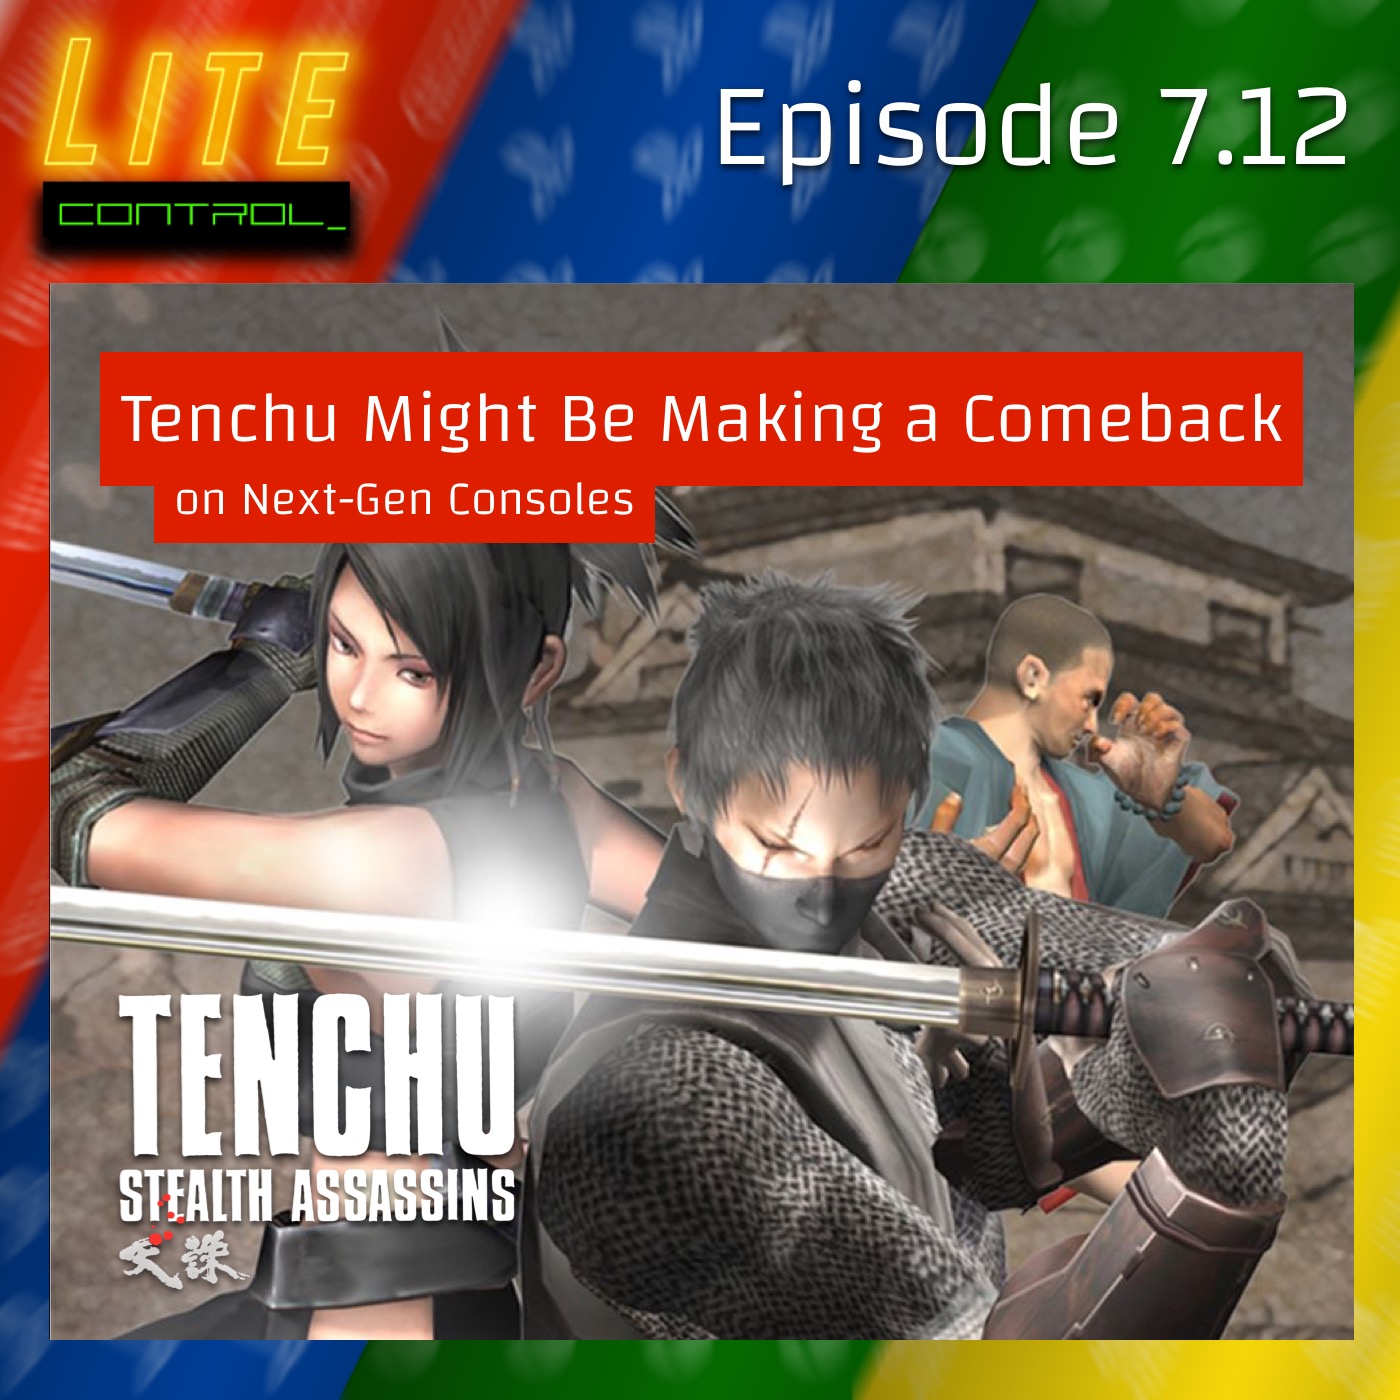 Lite Control 7.12 - Tenchu Rumored to Make a Comeback on Next-gen Consoles